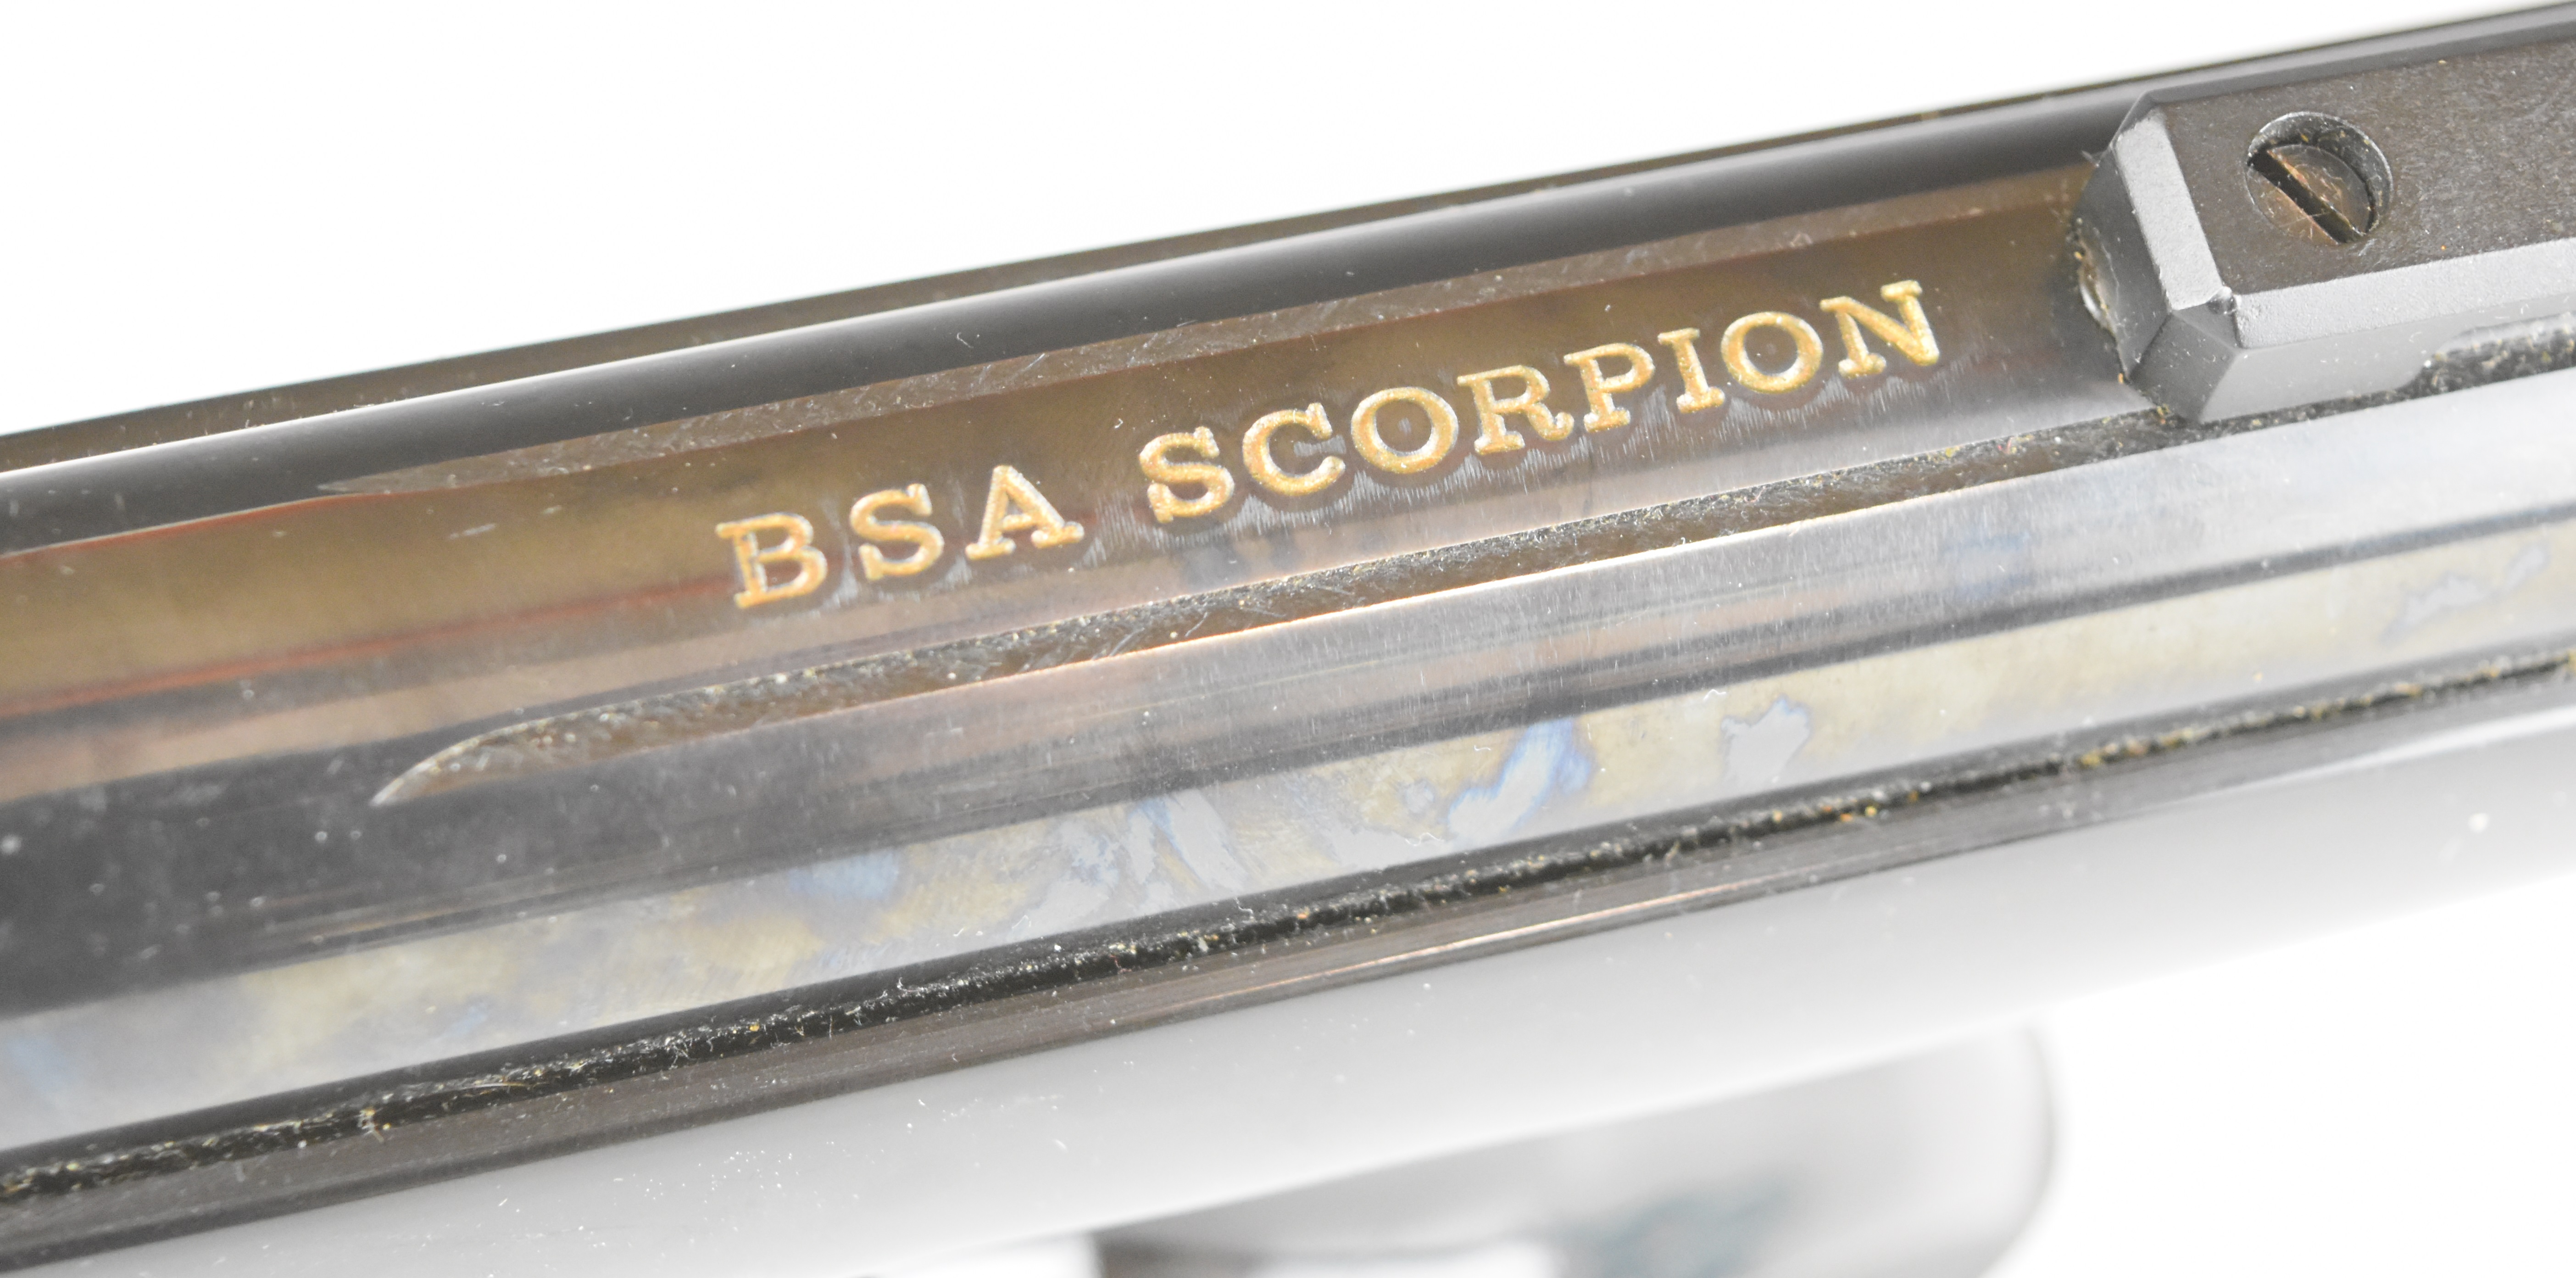 BSA Scorpion .177 target air pistol with shaped and chequered composite grip and adjustable - Image 9 of 12